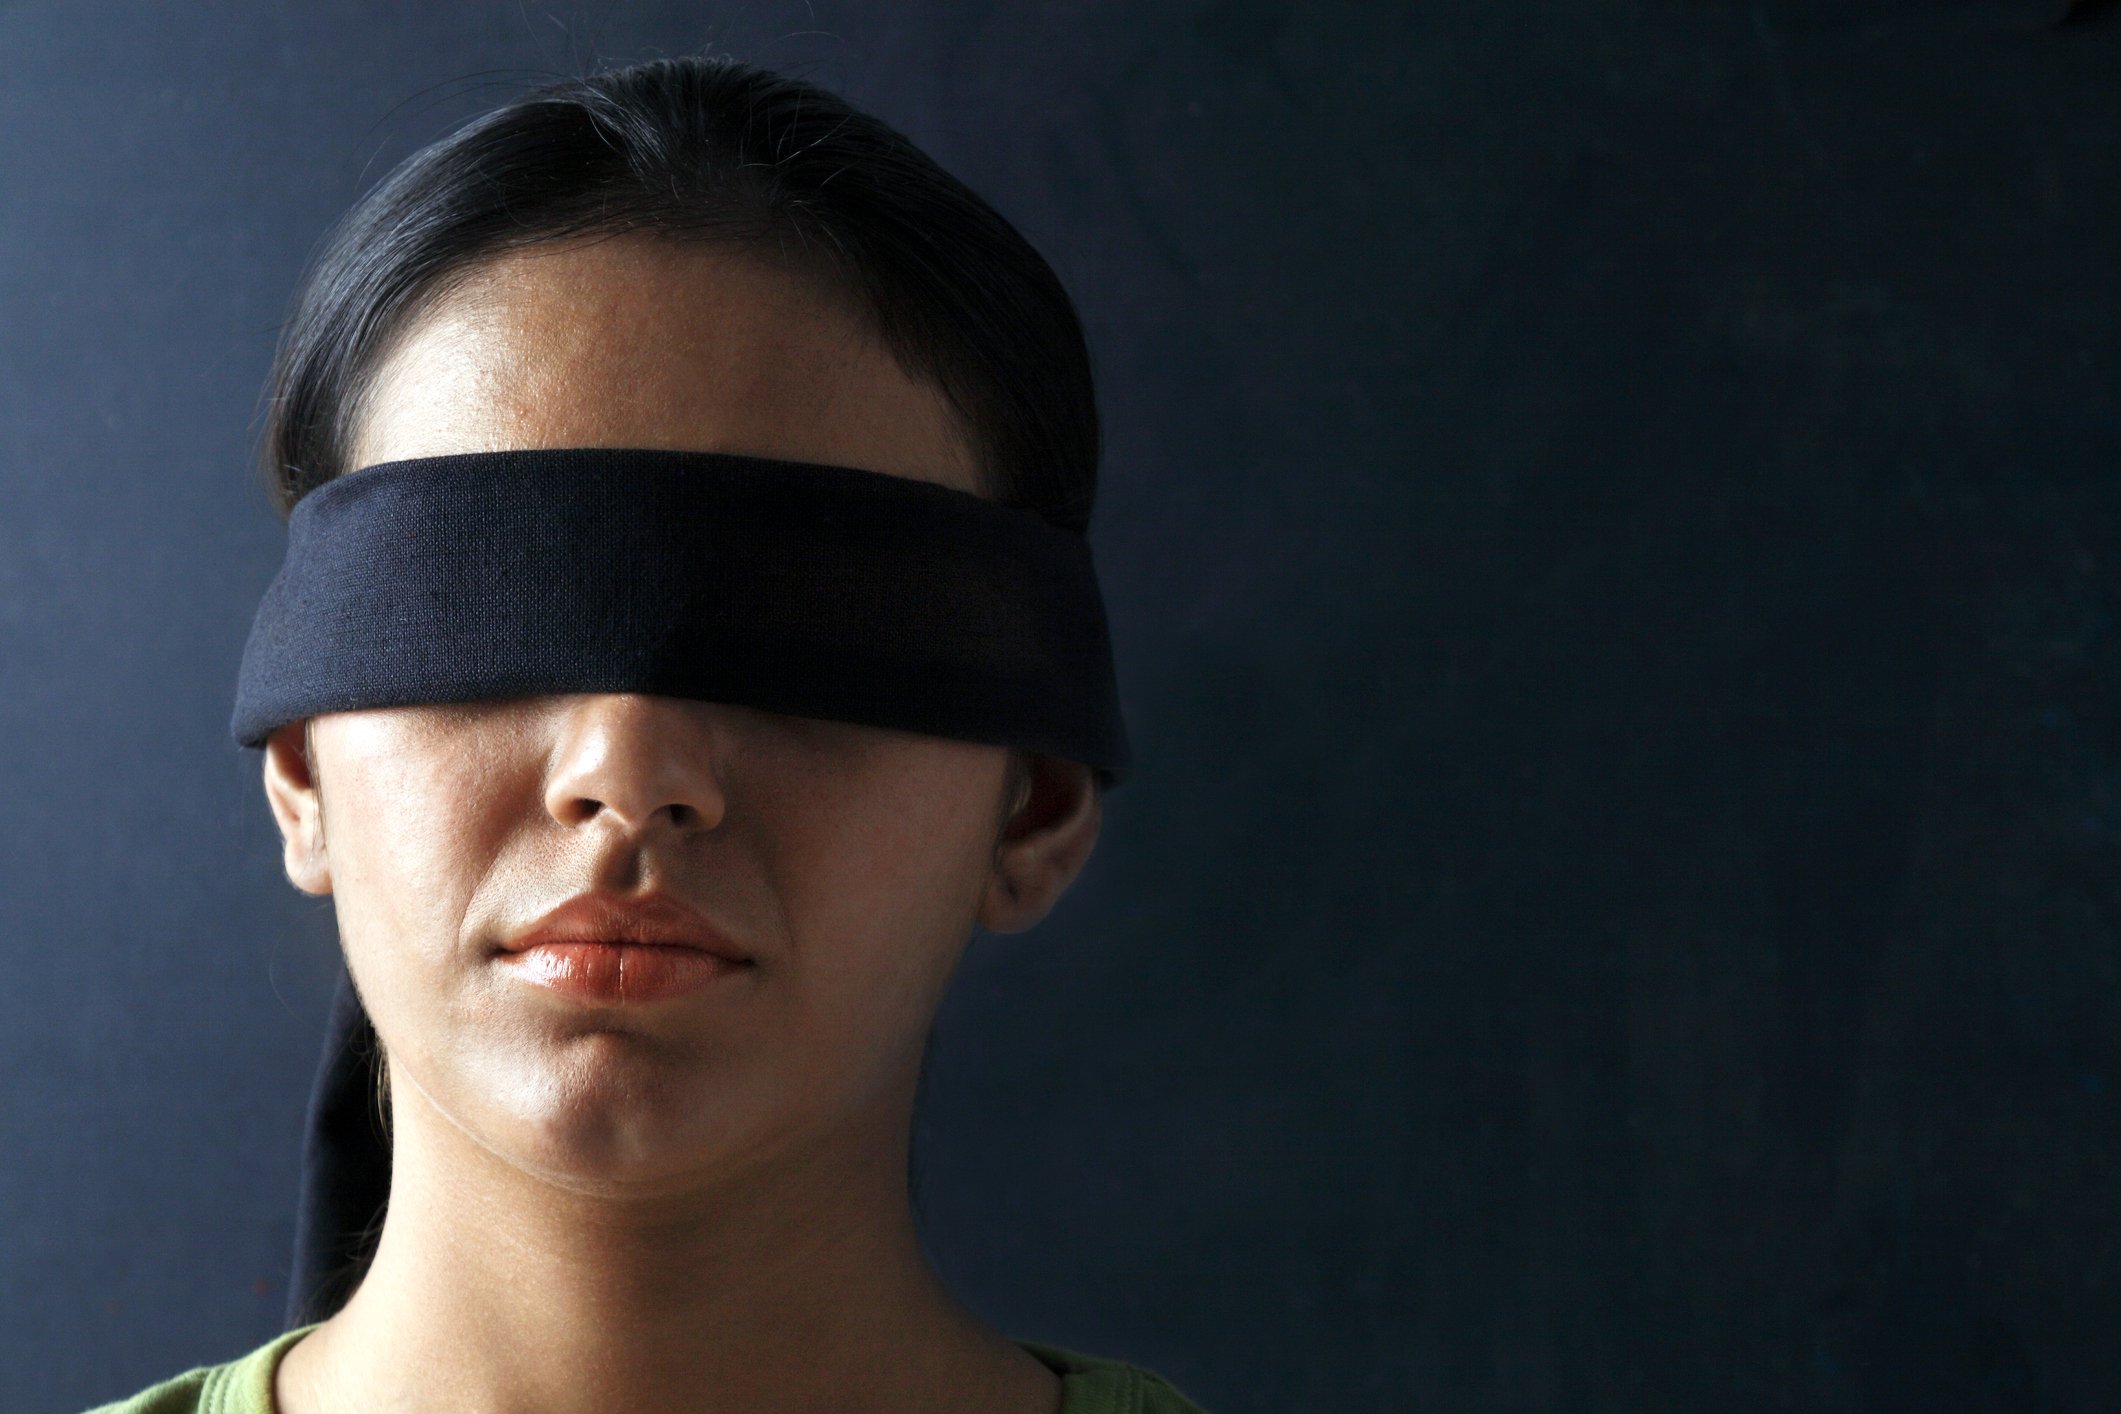 Blindfolding Doesn't Help People Understand What It's Like to be Blind -  Big Think